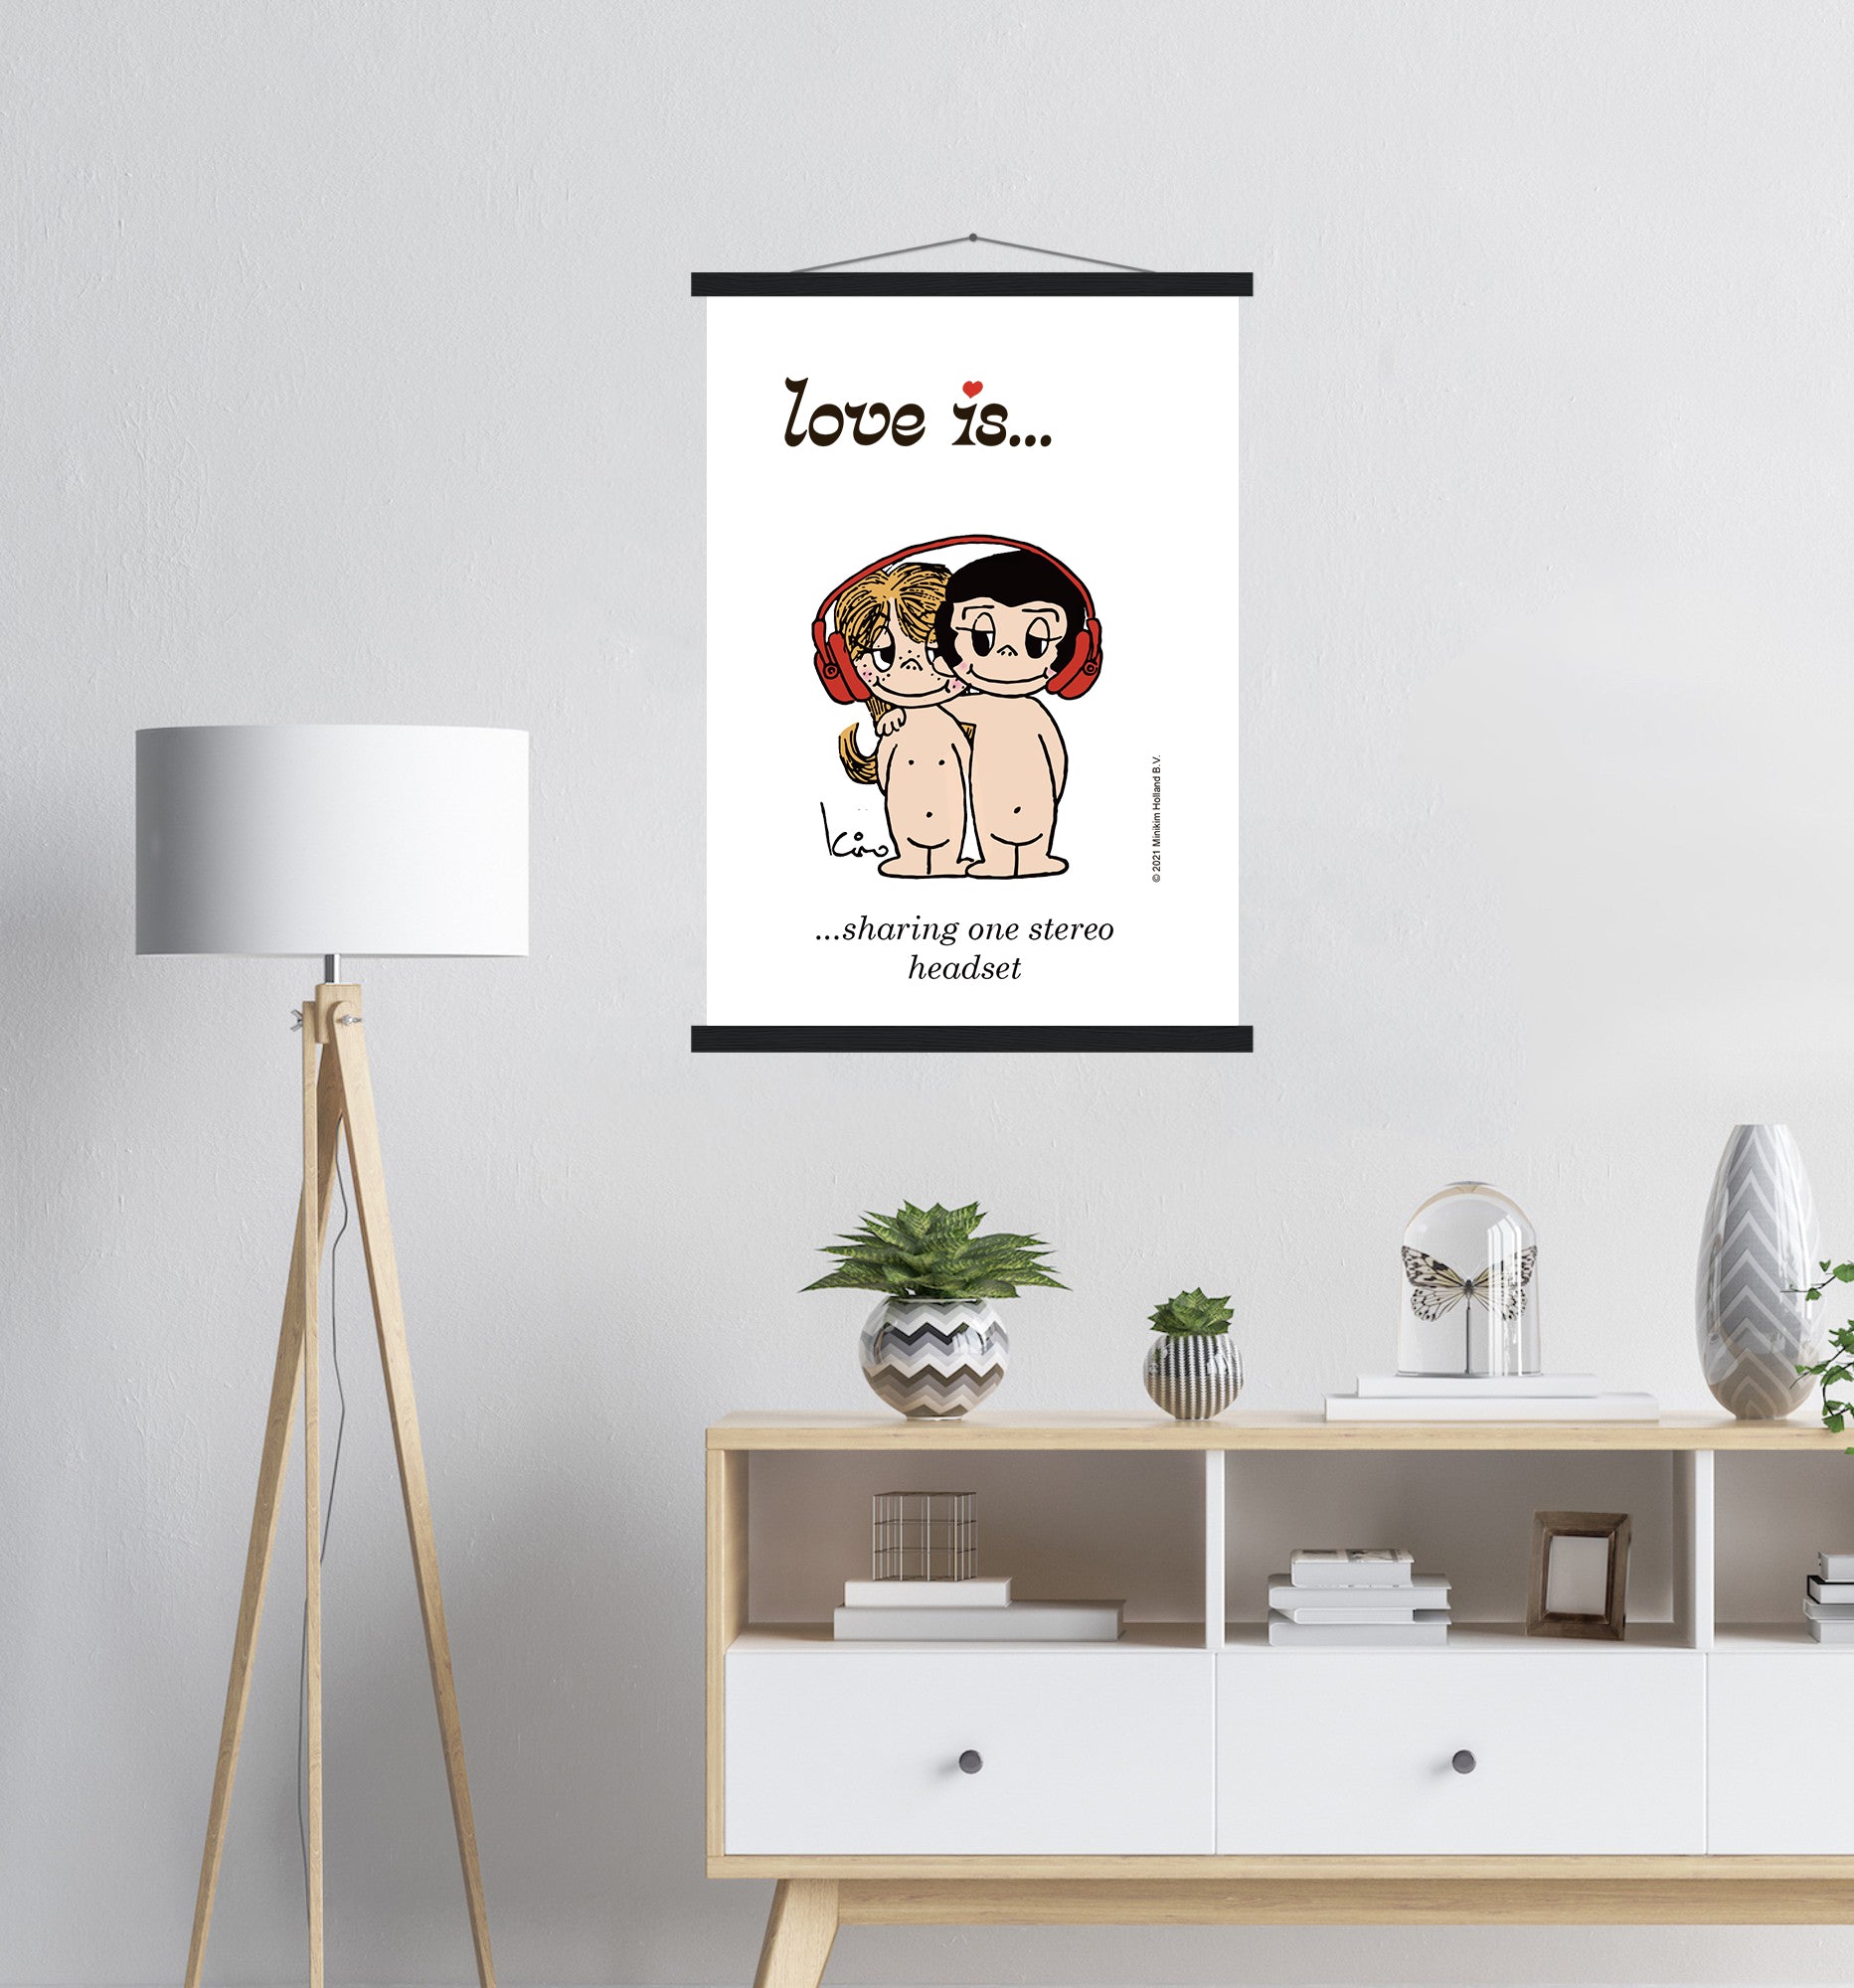 LOVE IS... SHARING ONE STEREO HEADSET VINTAGE ART PRINT